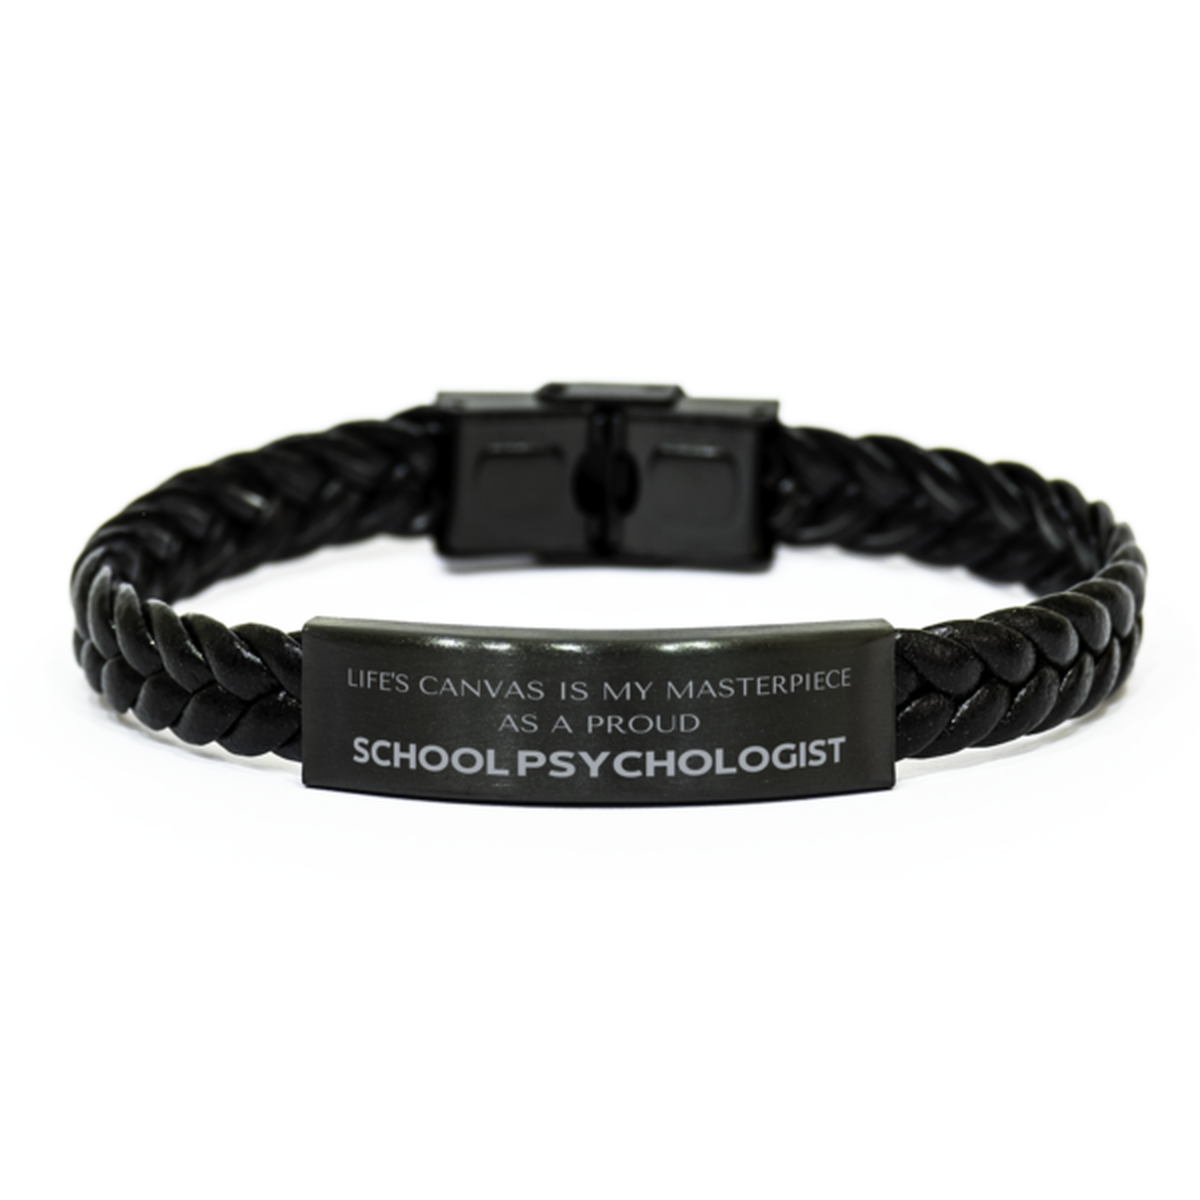 Proud School Psychologist Gifts, Life's canvas is my masterpiece, Epic Birthday Christmas Unique Braided Leather Bracelet For School Psychologist, Coworkers, Men, Women, Friends